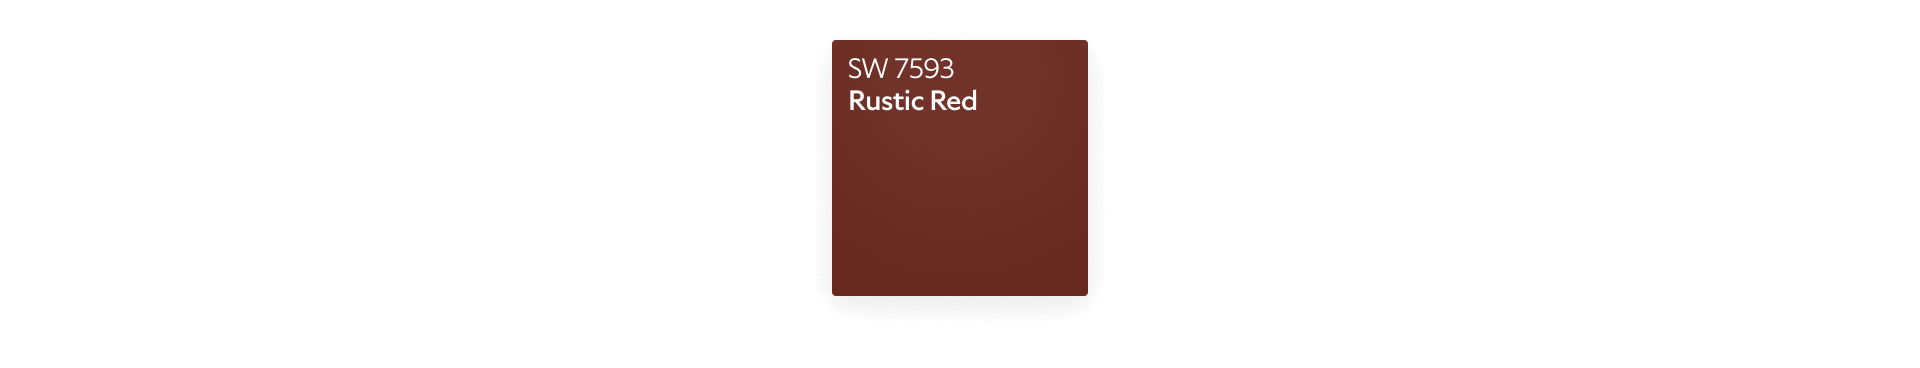 Color chip of Rustic Red SW 7593.